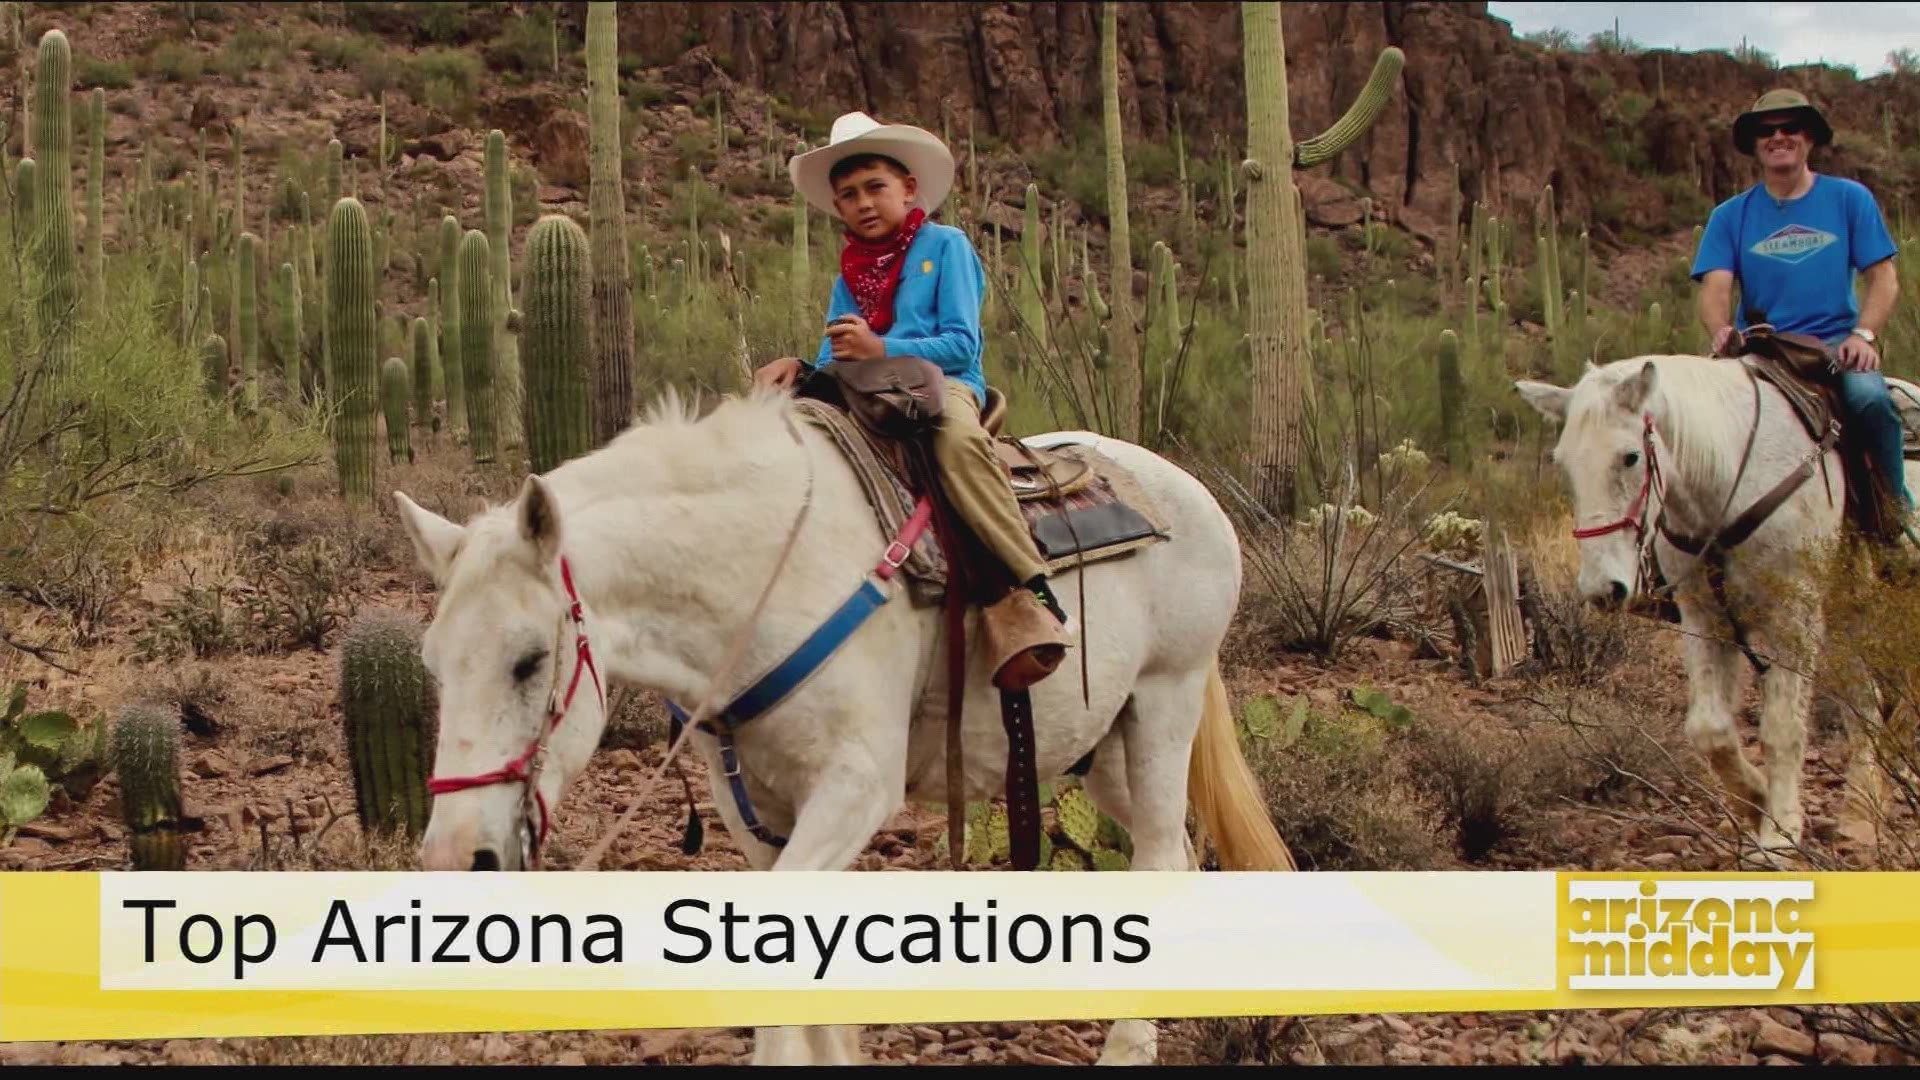 Becky Blaine with Visit Arizona shows us some of the top staycation ideas in Phoenix & Tucson Dude Ranches to check out